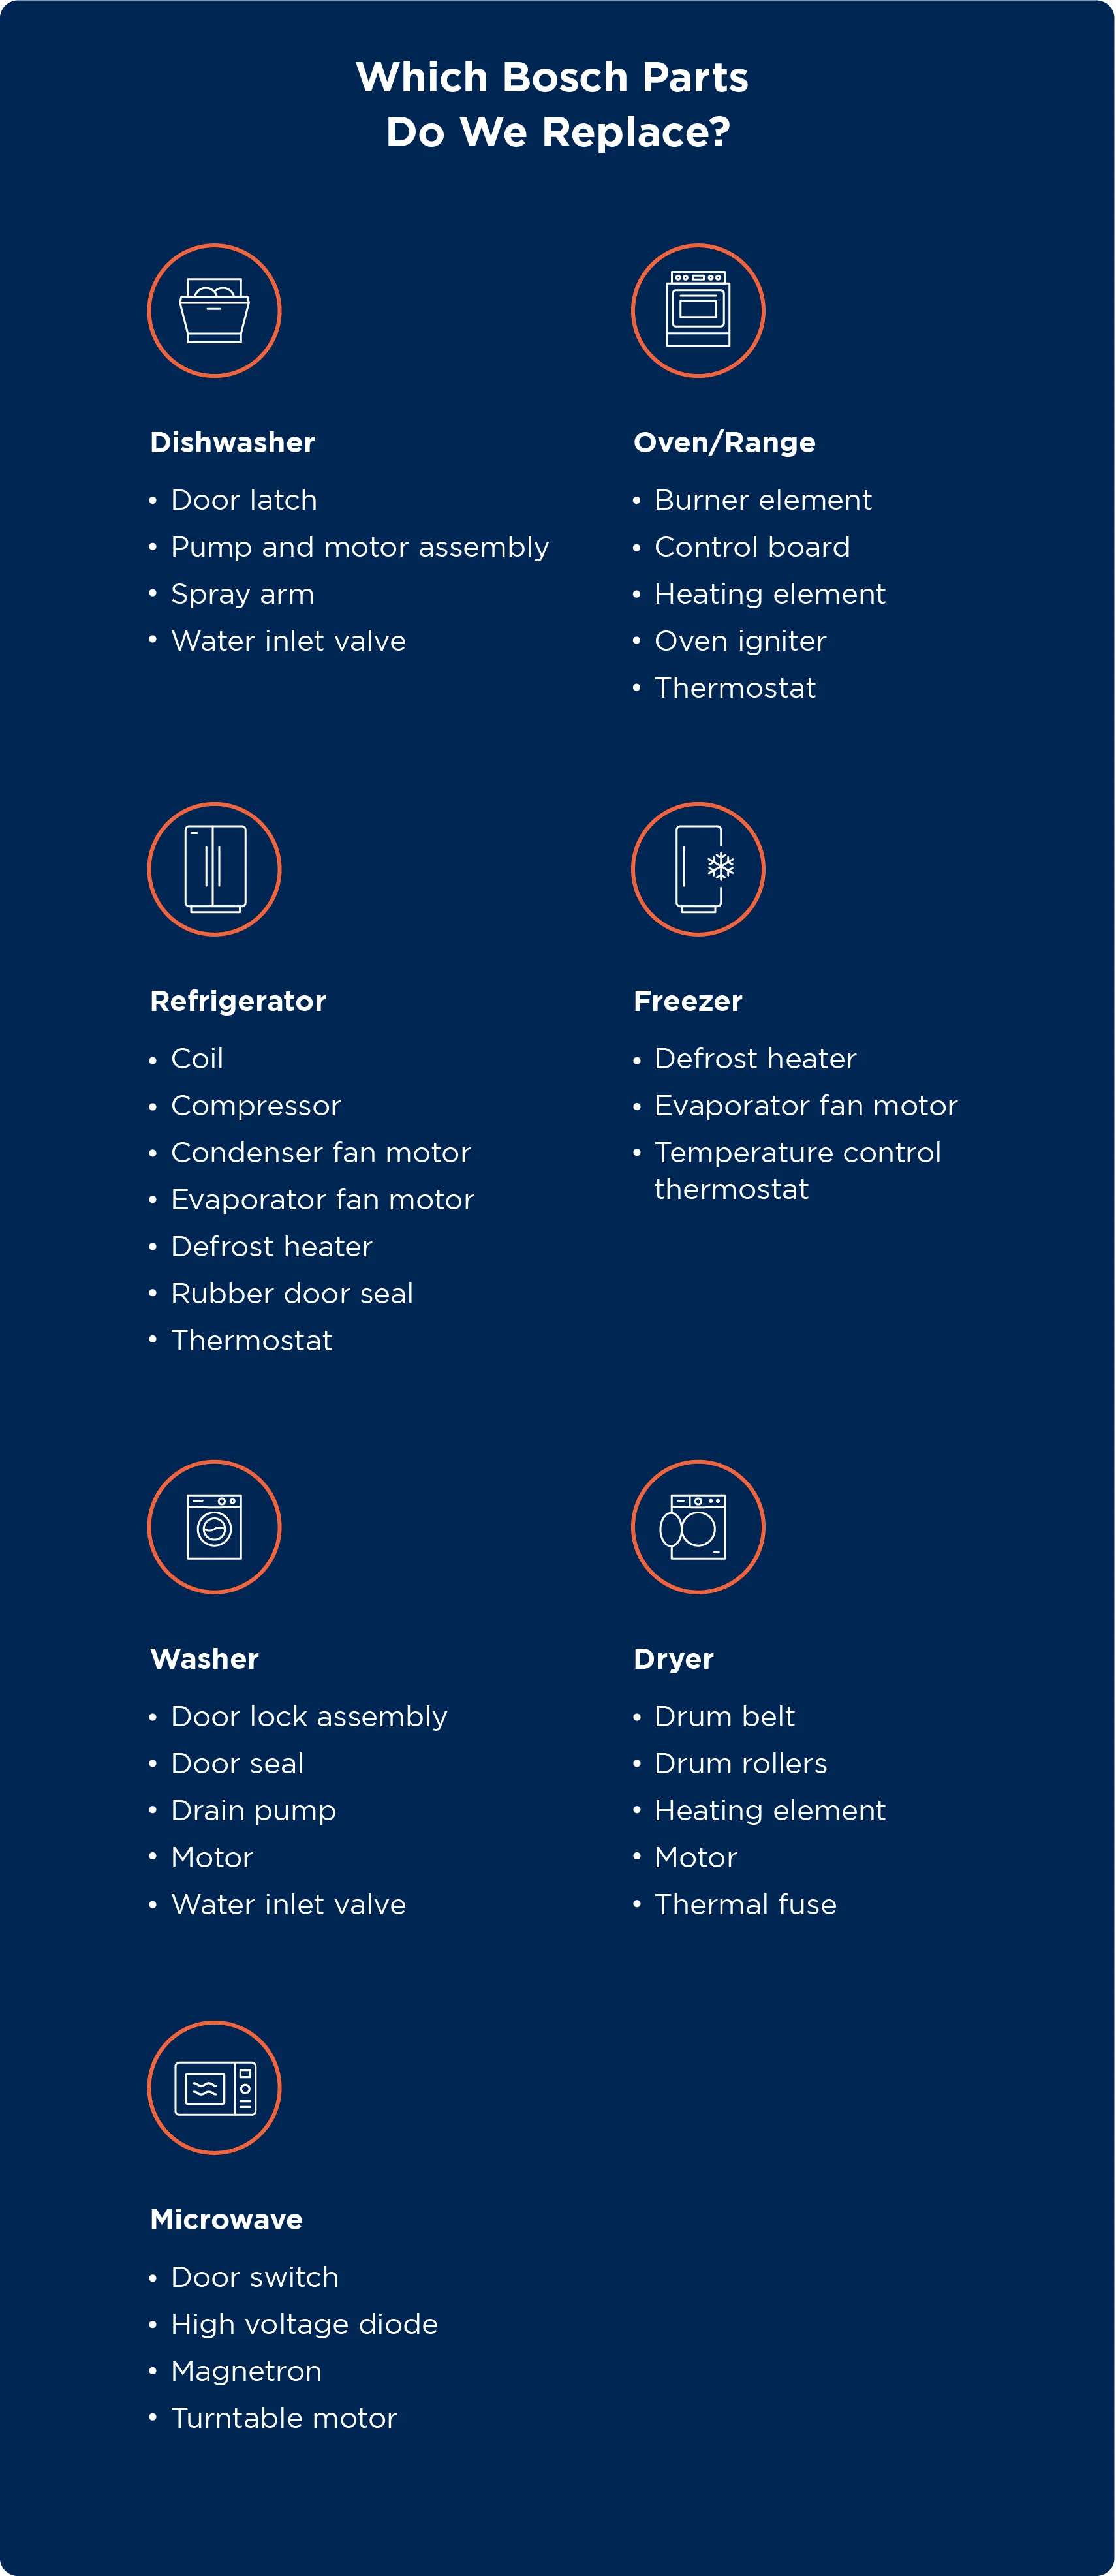 Graphic showing which Bosch appliance parts Mr. Appliance replaces.